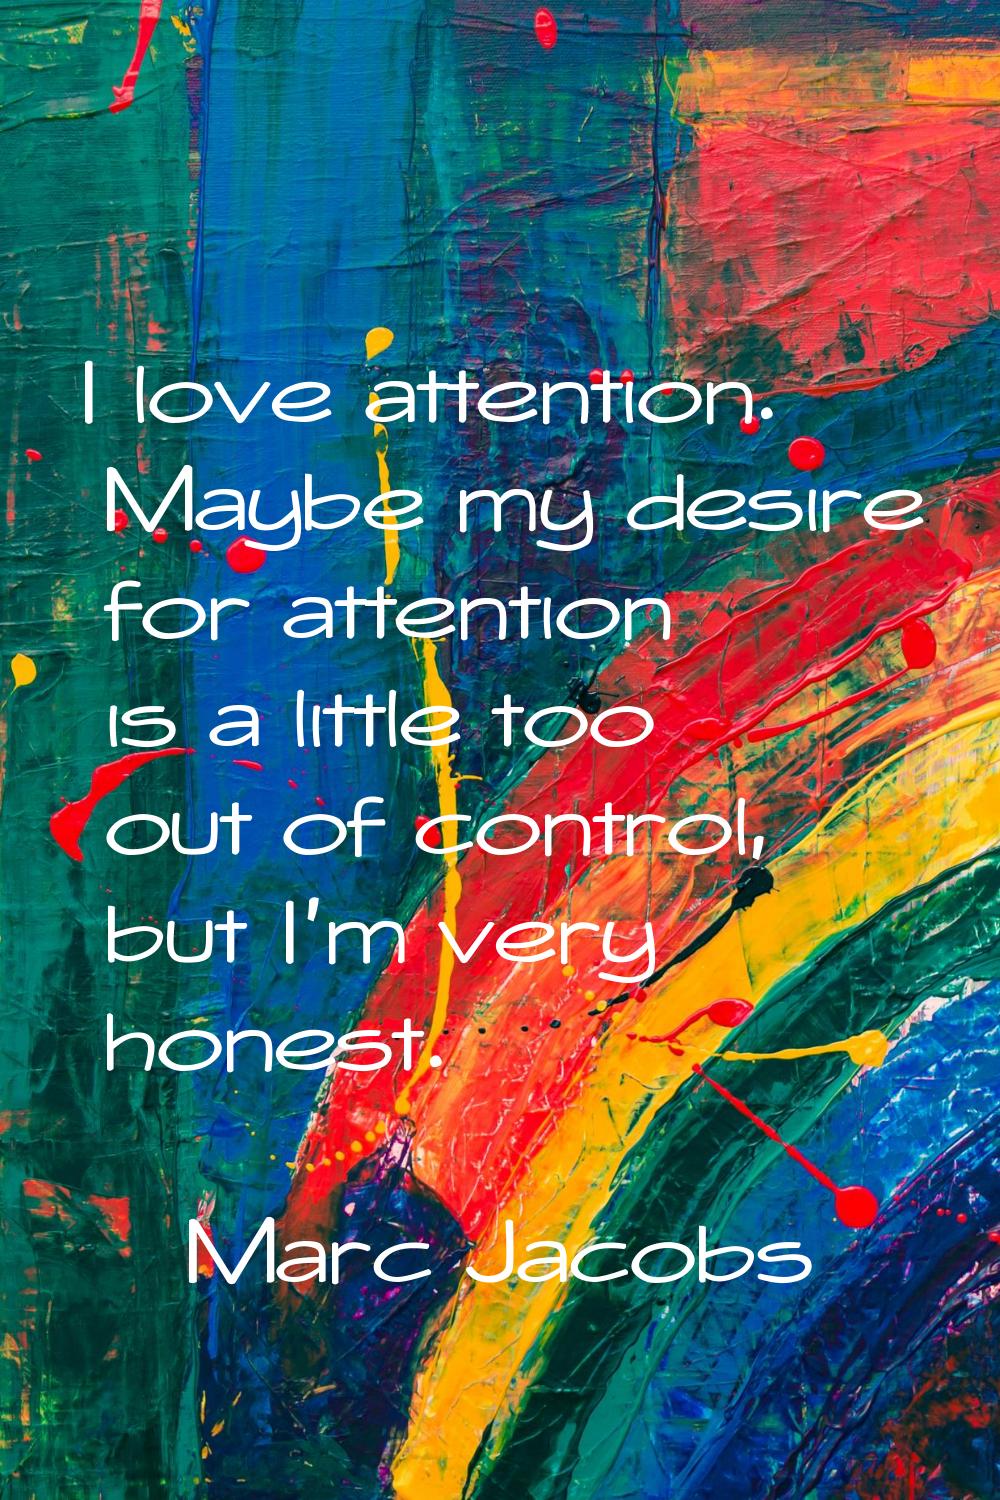 I love attention. Maybe my desire for attention is a little too out of control, but I'm very honest